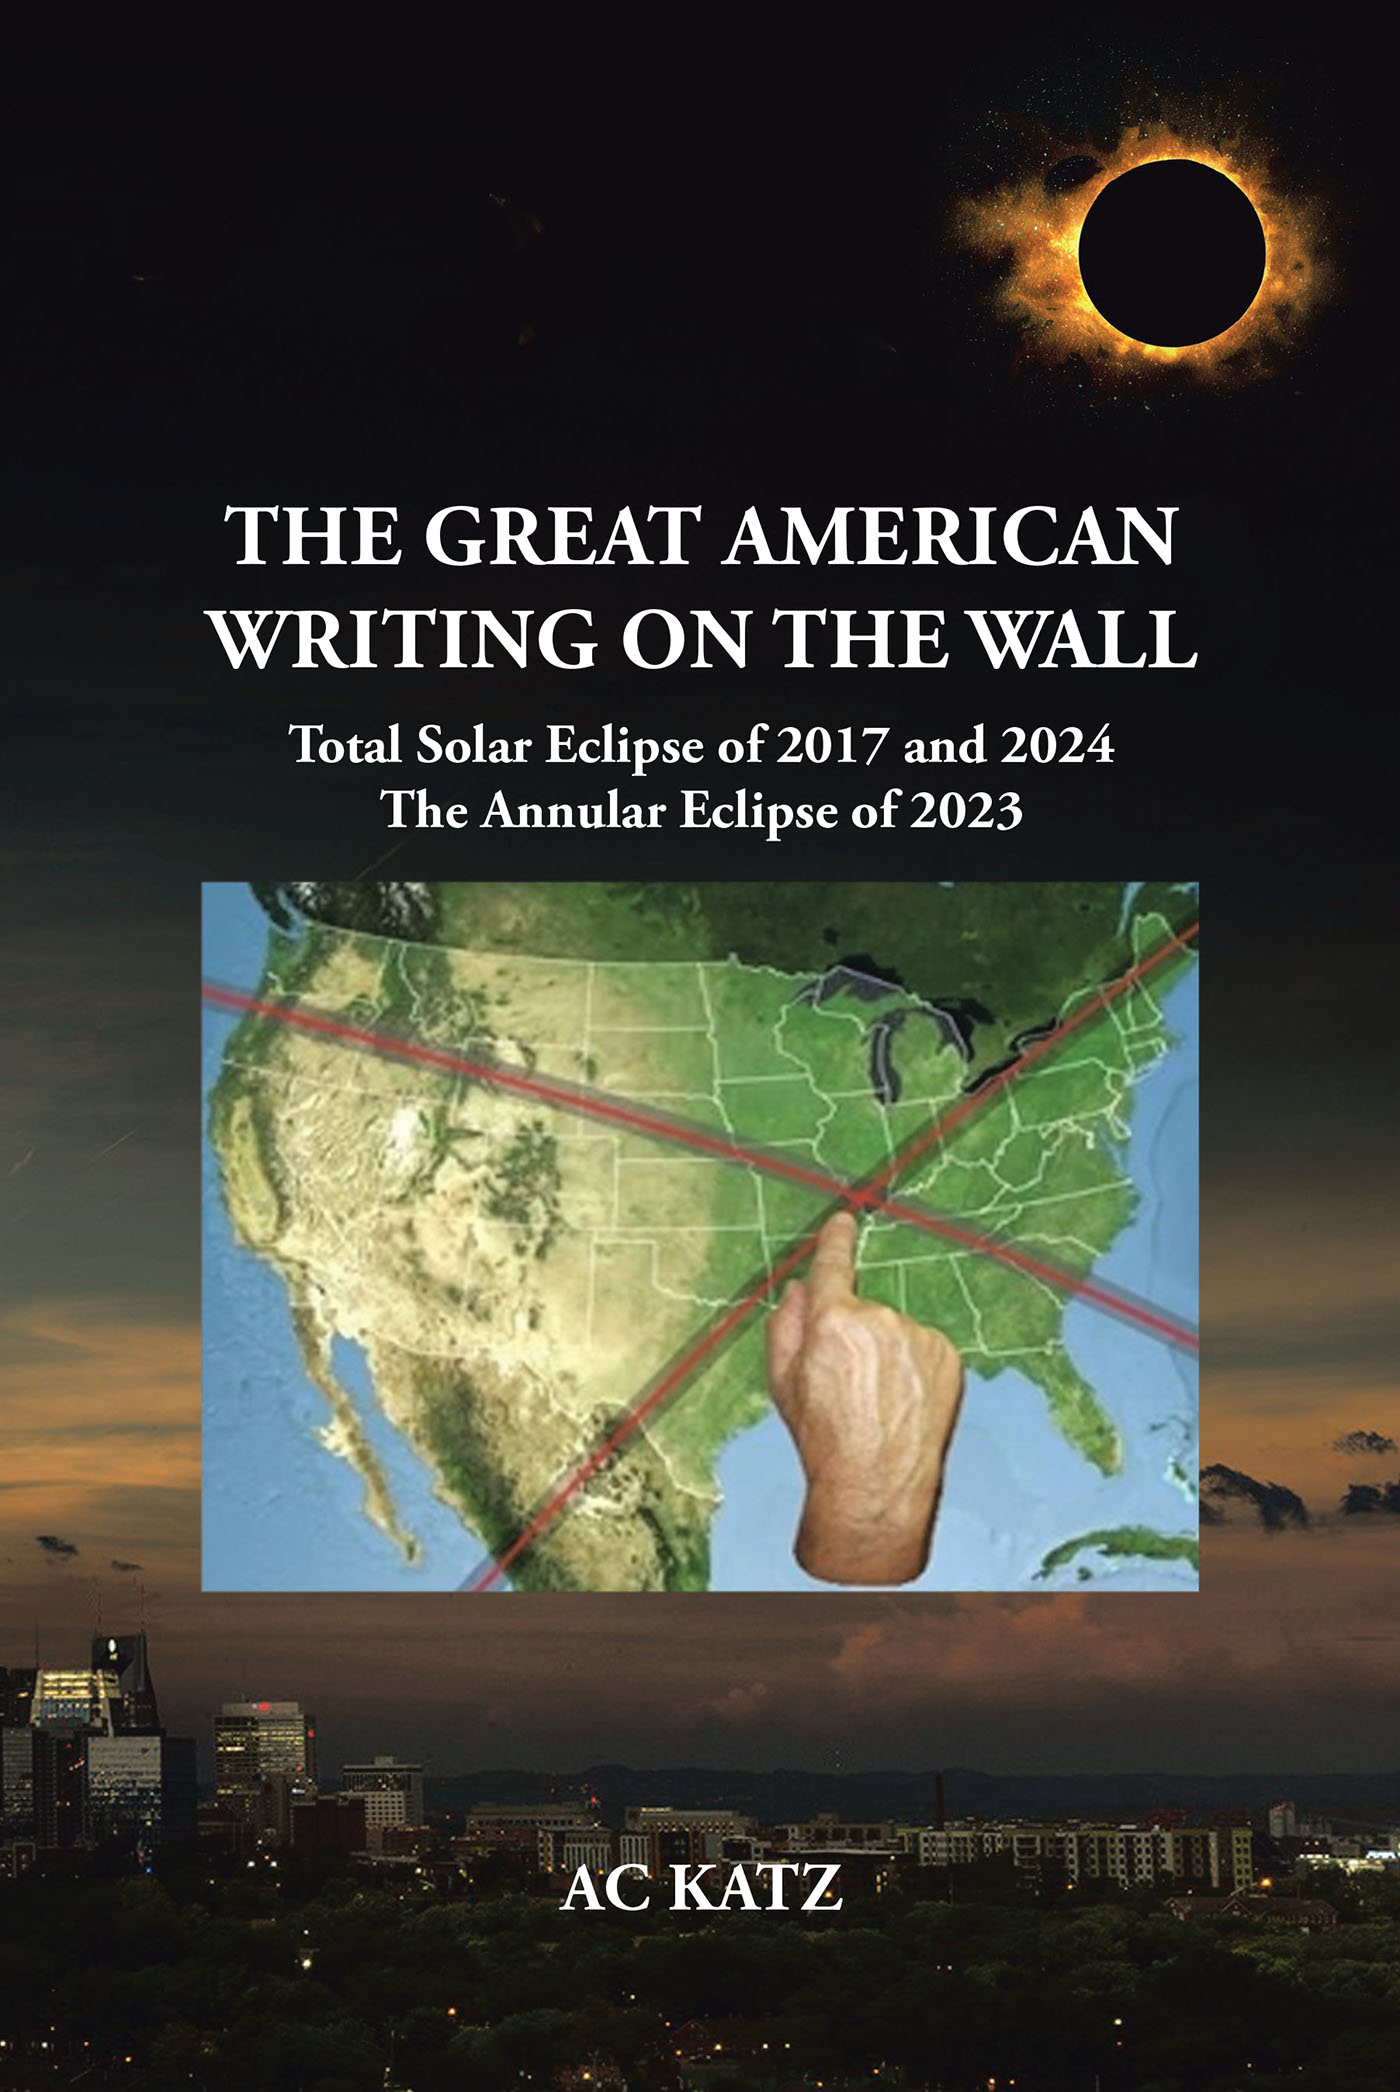 AC Katz’s Newly Released “The Great American Writing on the Wall” is a Fascinating Discussion of the Importance of the Impending 2024 Eclipse